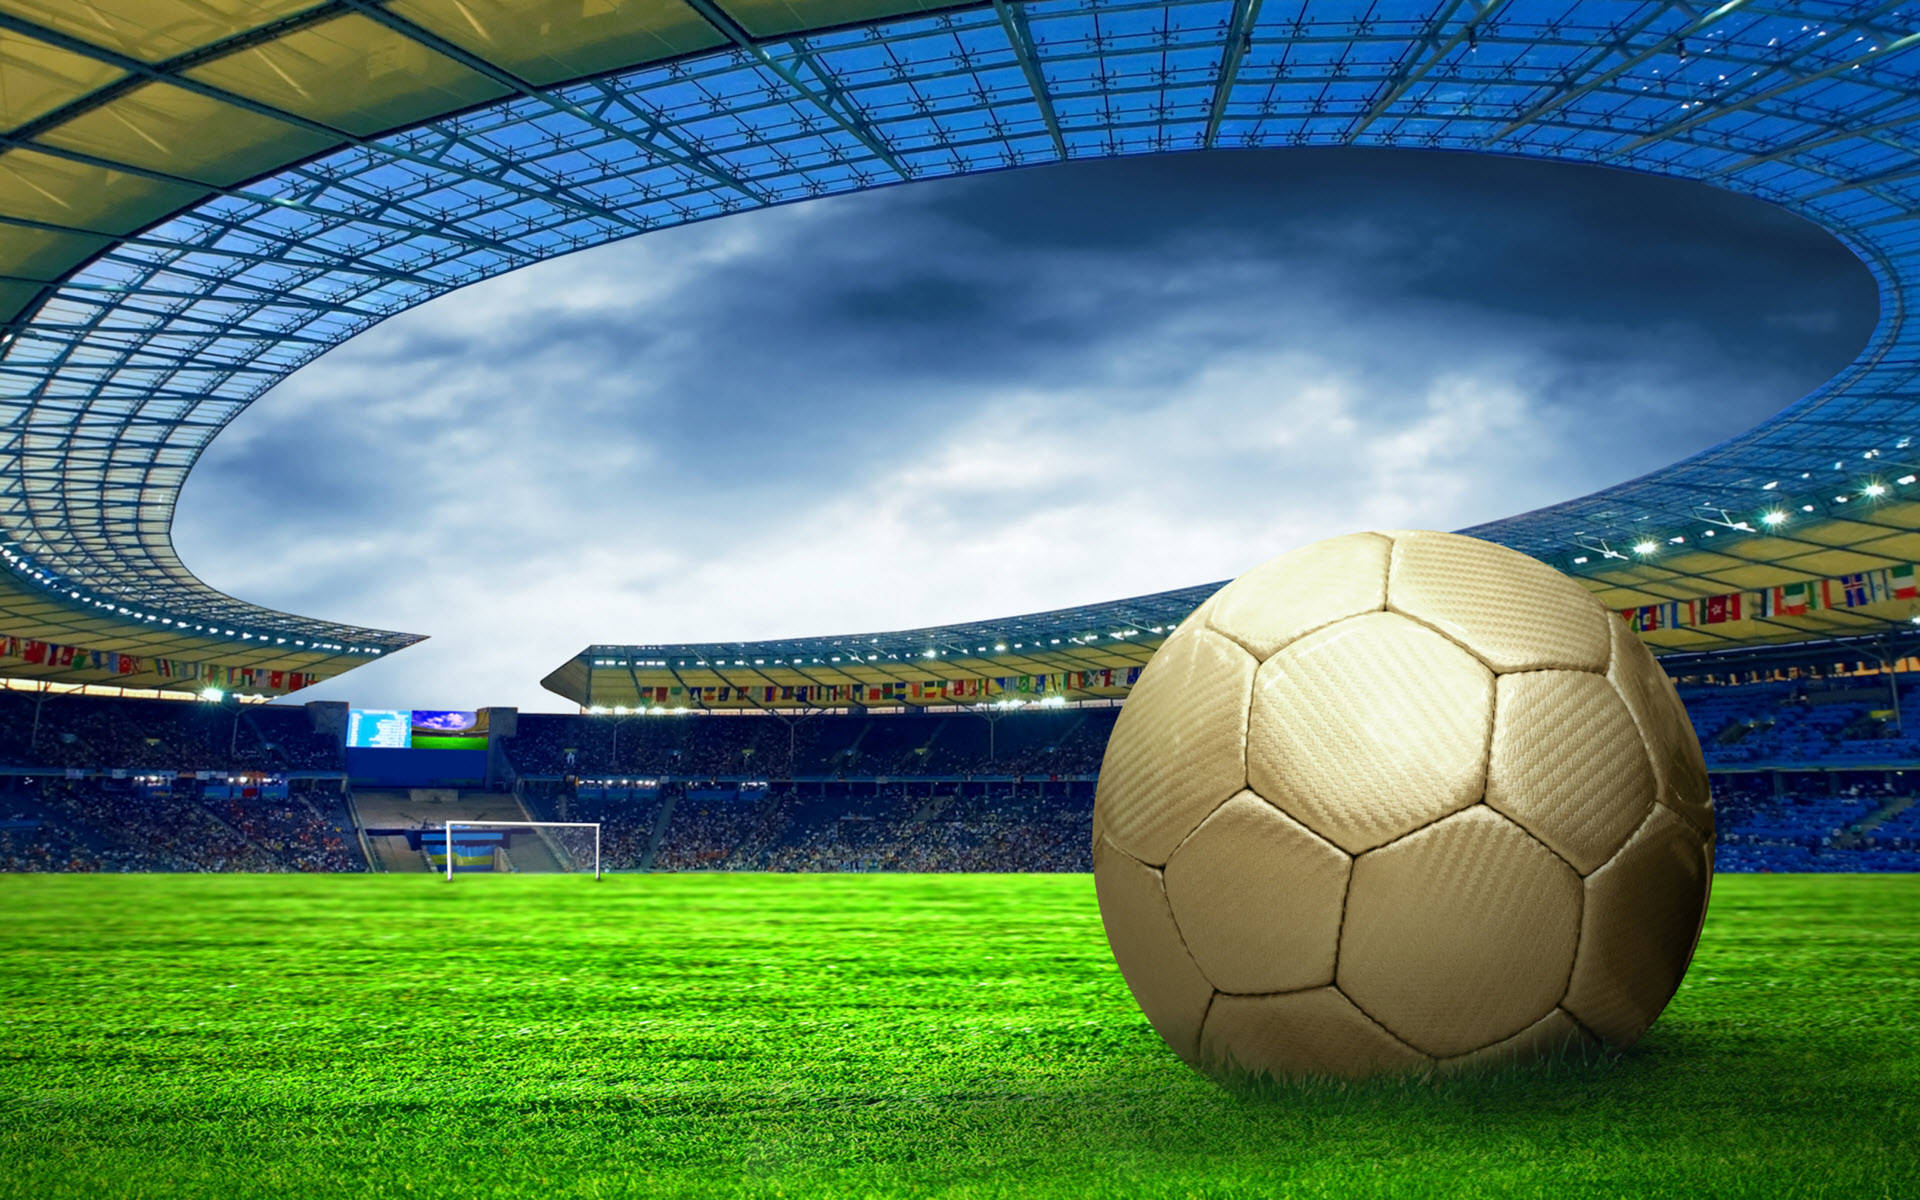 Free Soccer Wallpaper Downloads, [2700+] Soccer Wallpapers for FREE |  